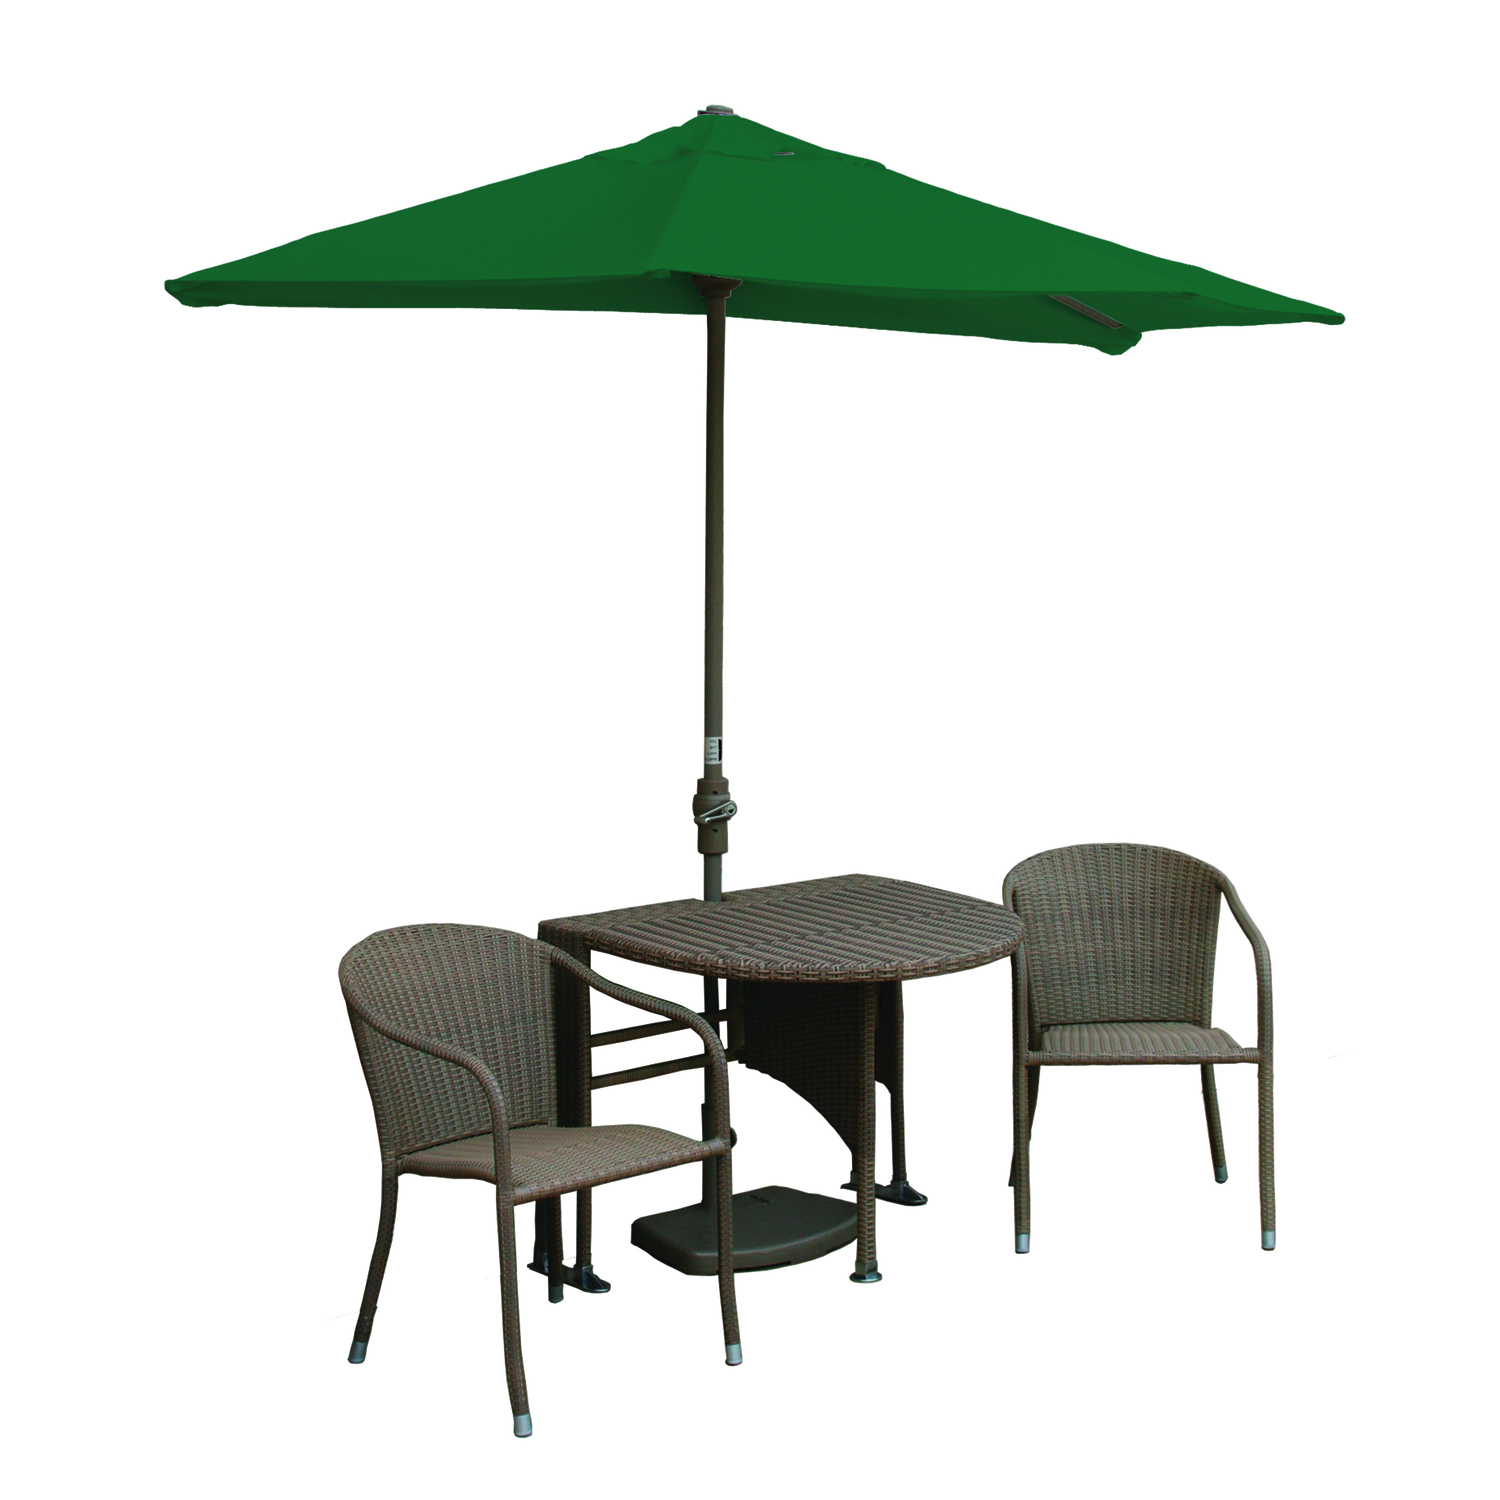 Blue Star Group Terrace Mates Adena All-Weather Wicker Coffee Color Table Set w/ 9'-Wide OFF-THE-WALL BRELLA - Green SolarVista Canopy - image 1 of 7